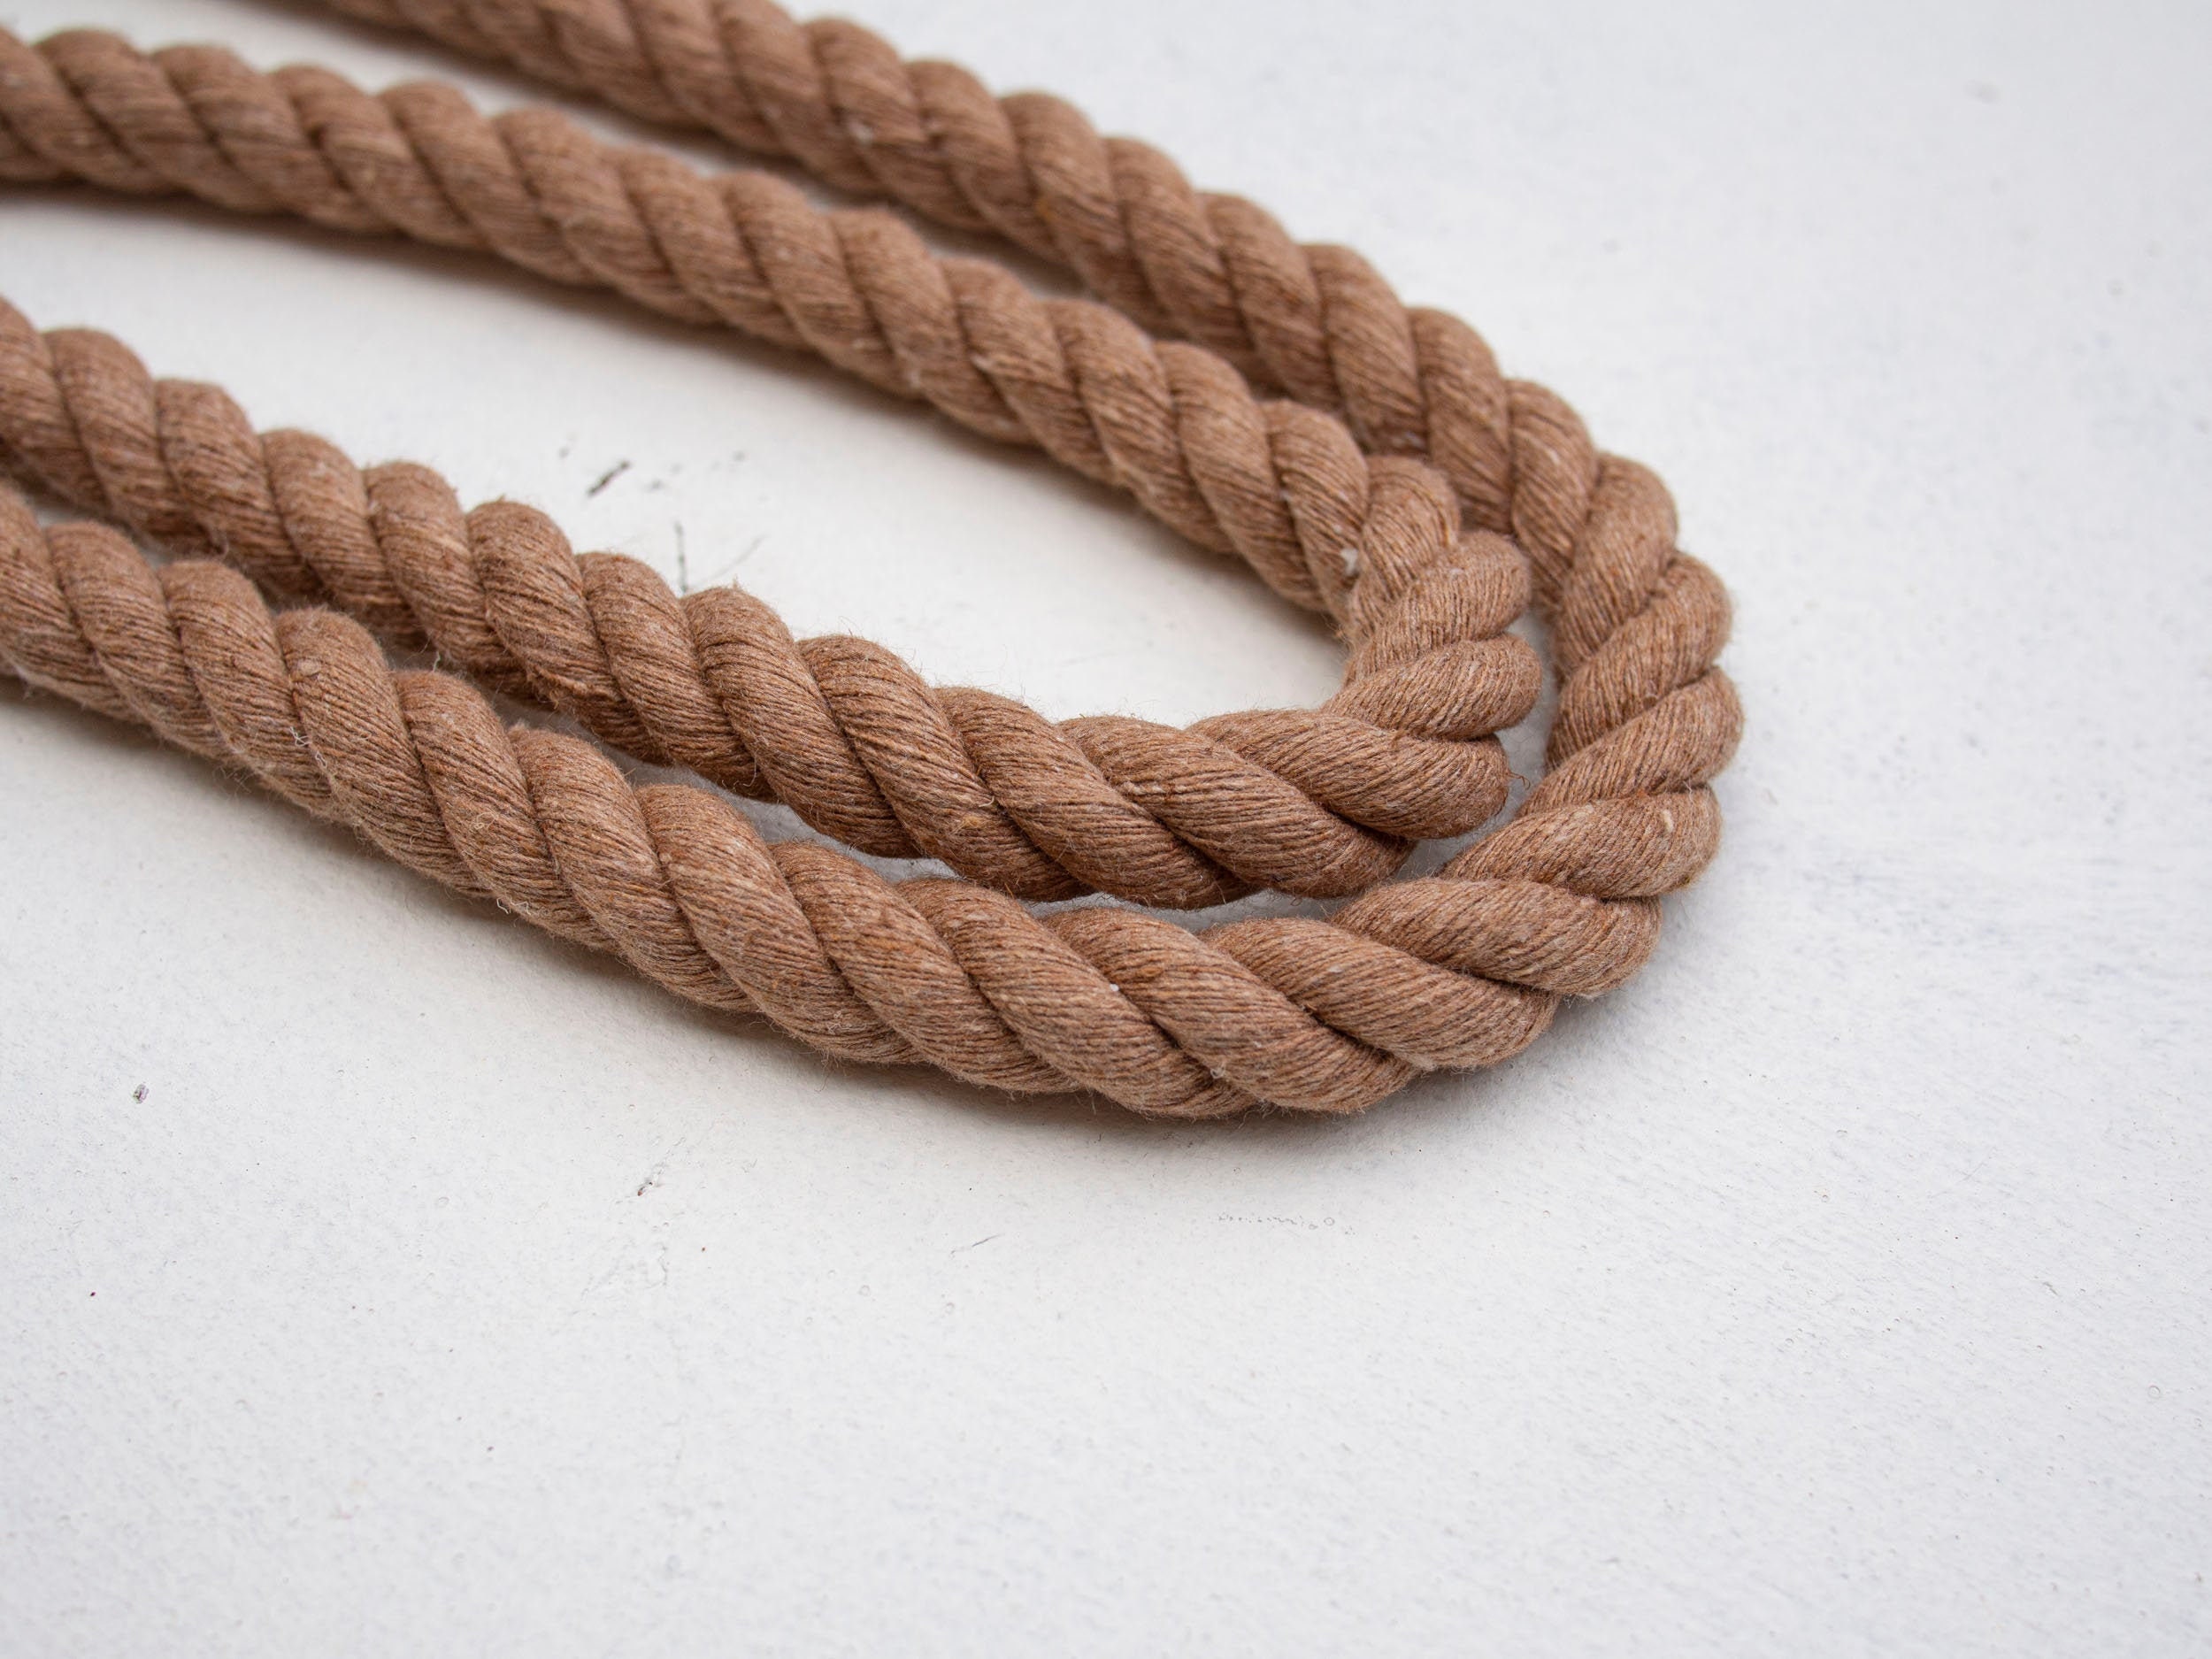 10 Mm Three Twisted Cotton Rope ,brown Twisted High Quality Cotton Cord,soft  Macrame Cotton Cord,diy Projects,home Decoration,nautical Rope 